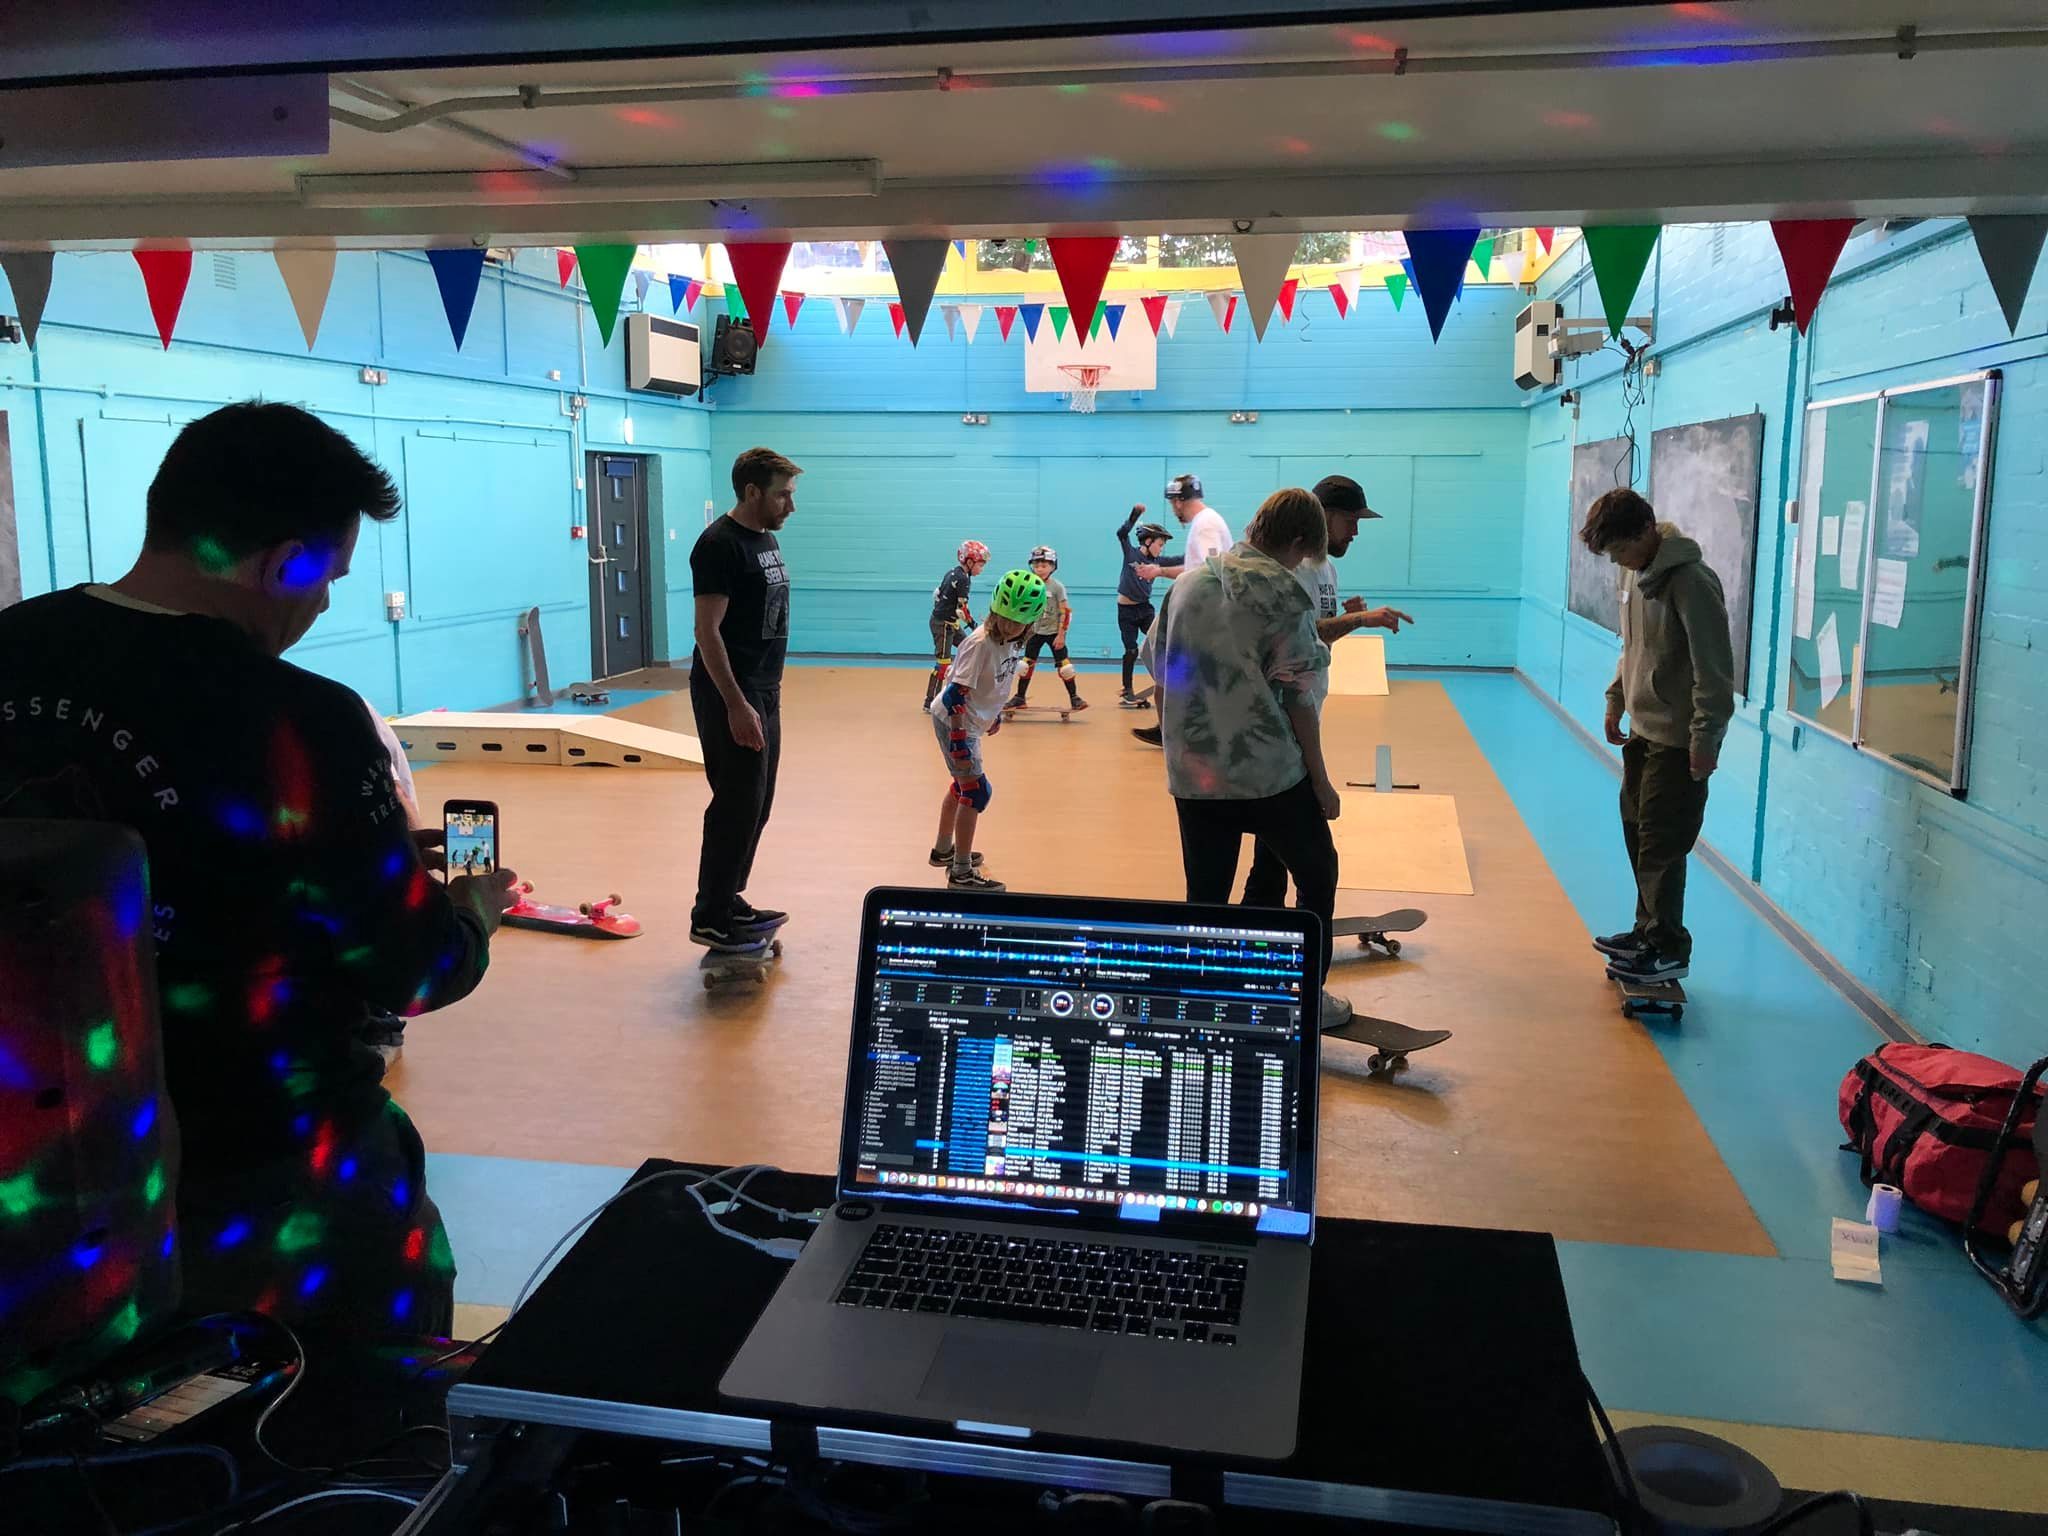 The skateboarding workshop at Lymm Youth Centre - Pictures: The Friends of Lymm Skatepark